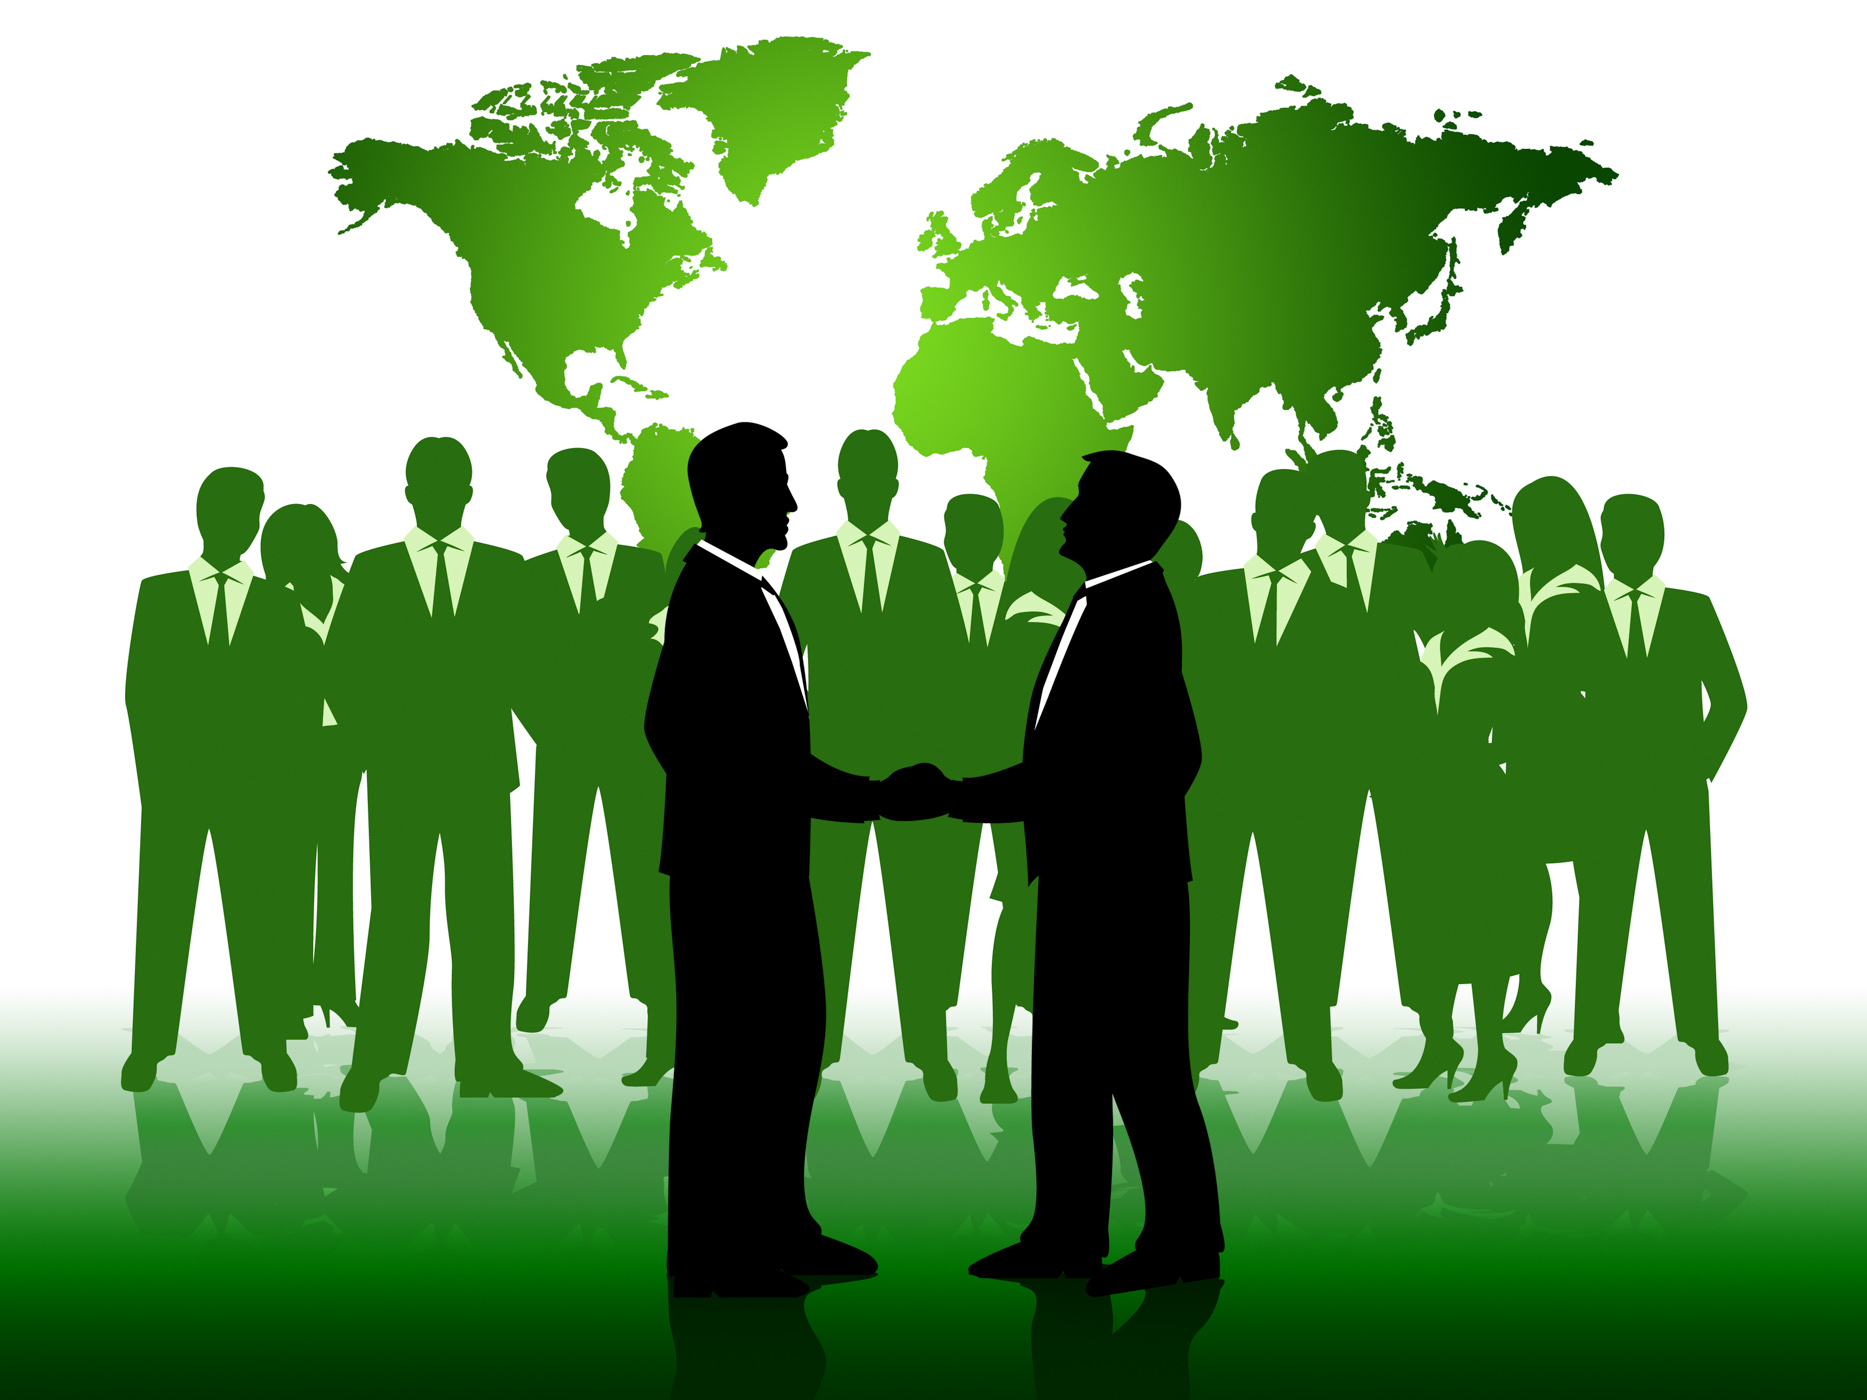 Business people shows working together and businessmen photo